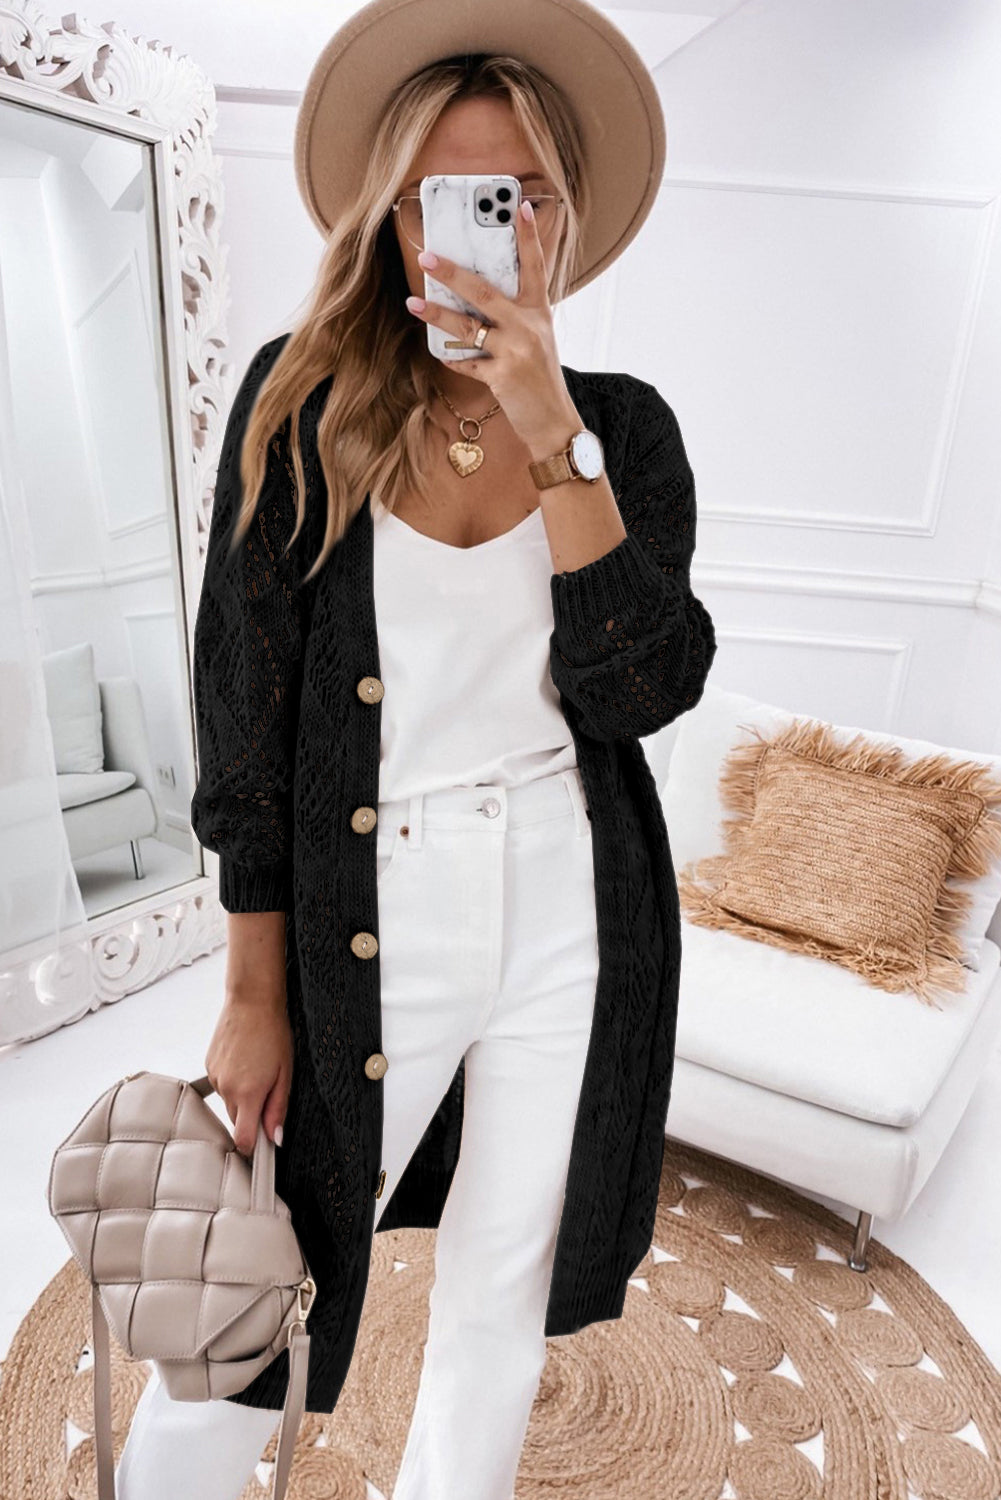 V-Neck Long Sleeve Cardigan - Women’s Clothing & Accessories - Shirts & Tops - 3 - 2024